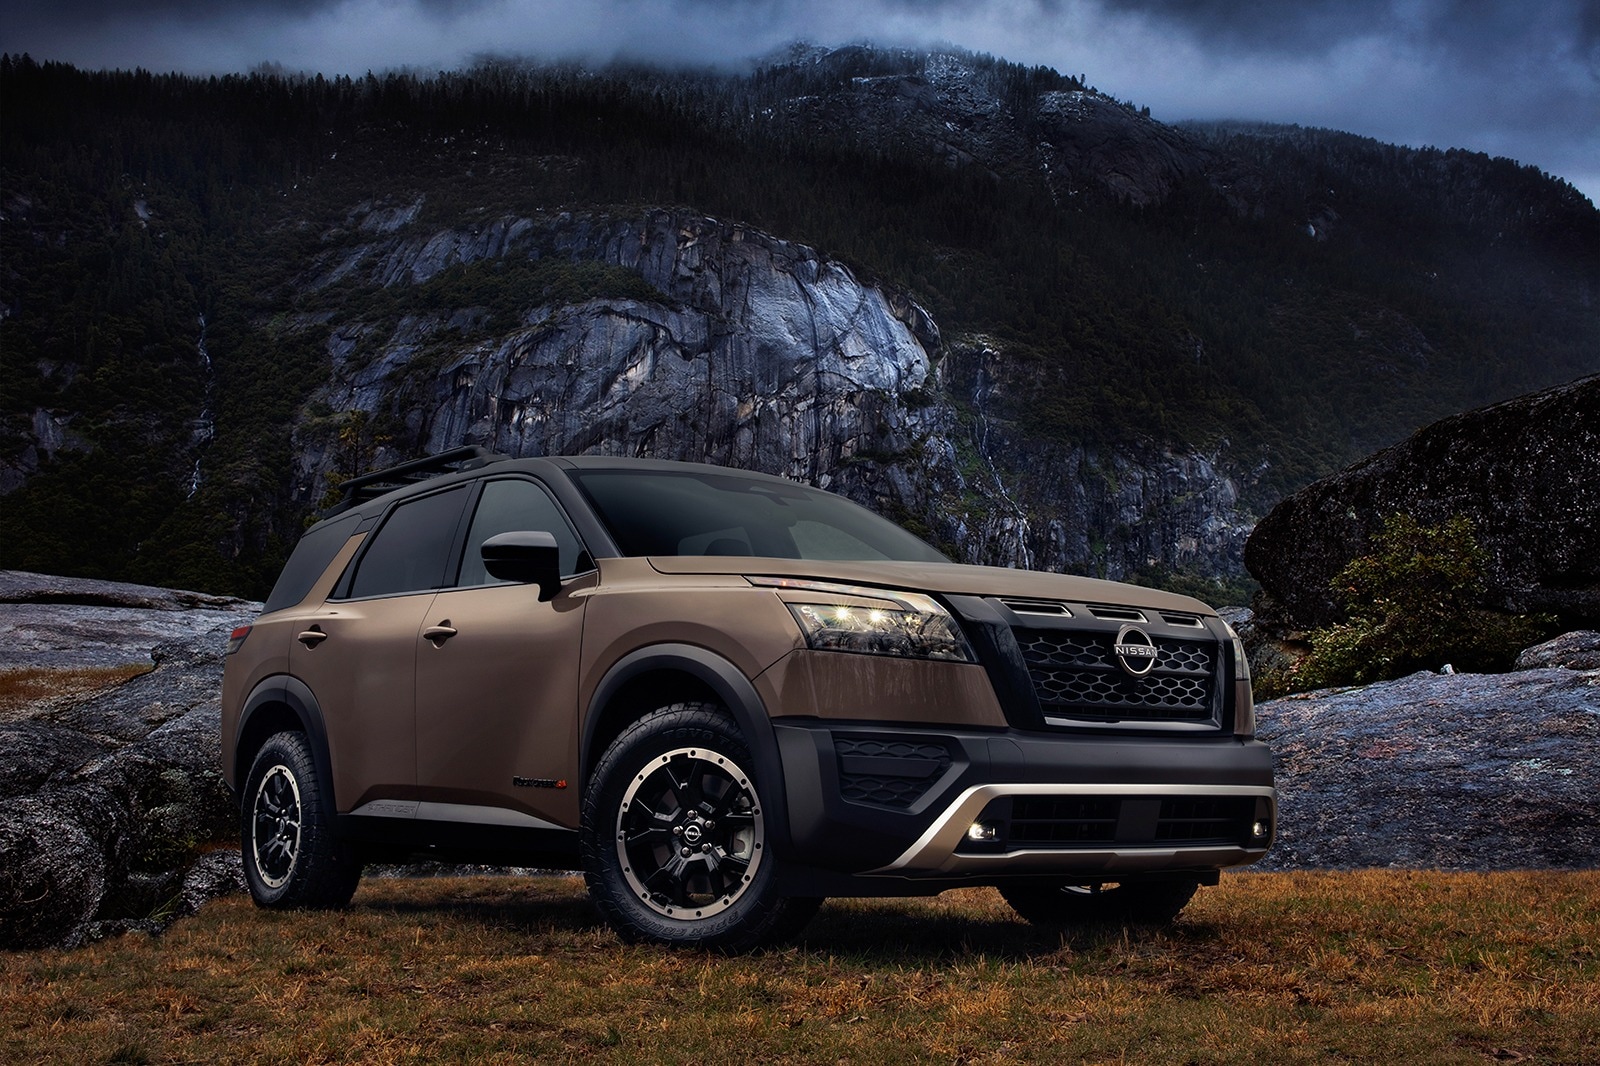 New Rock Creek Model gives the 2023 Nissan Pathfinder Some Off-Road Cred